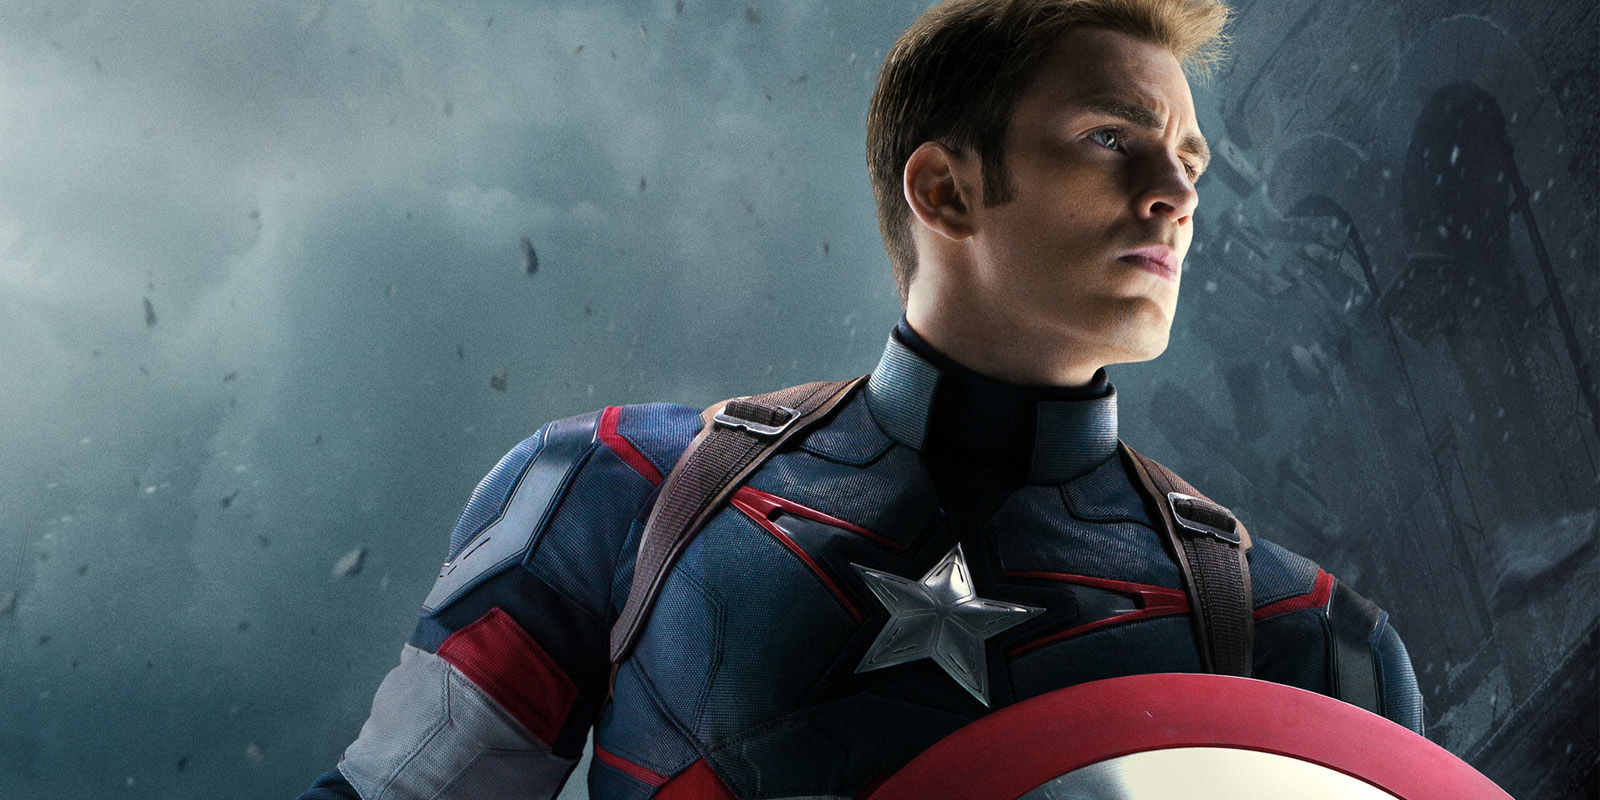 Avengers 4 will be Chris Evans’ Final Appearance as Captain America